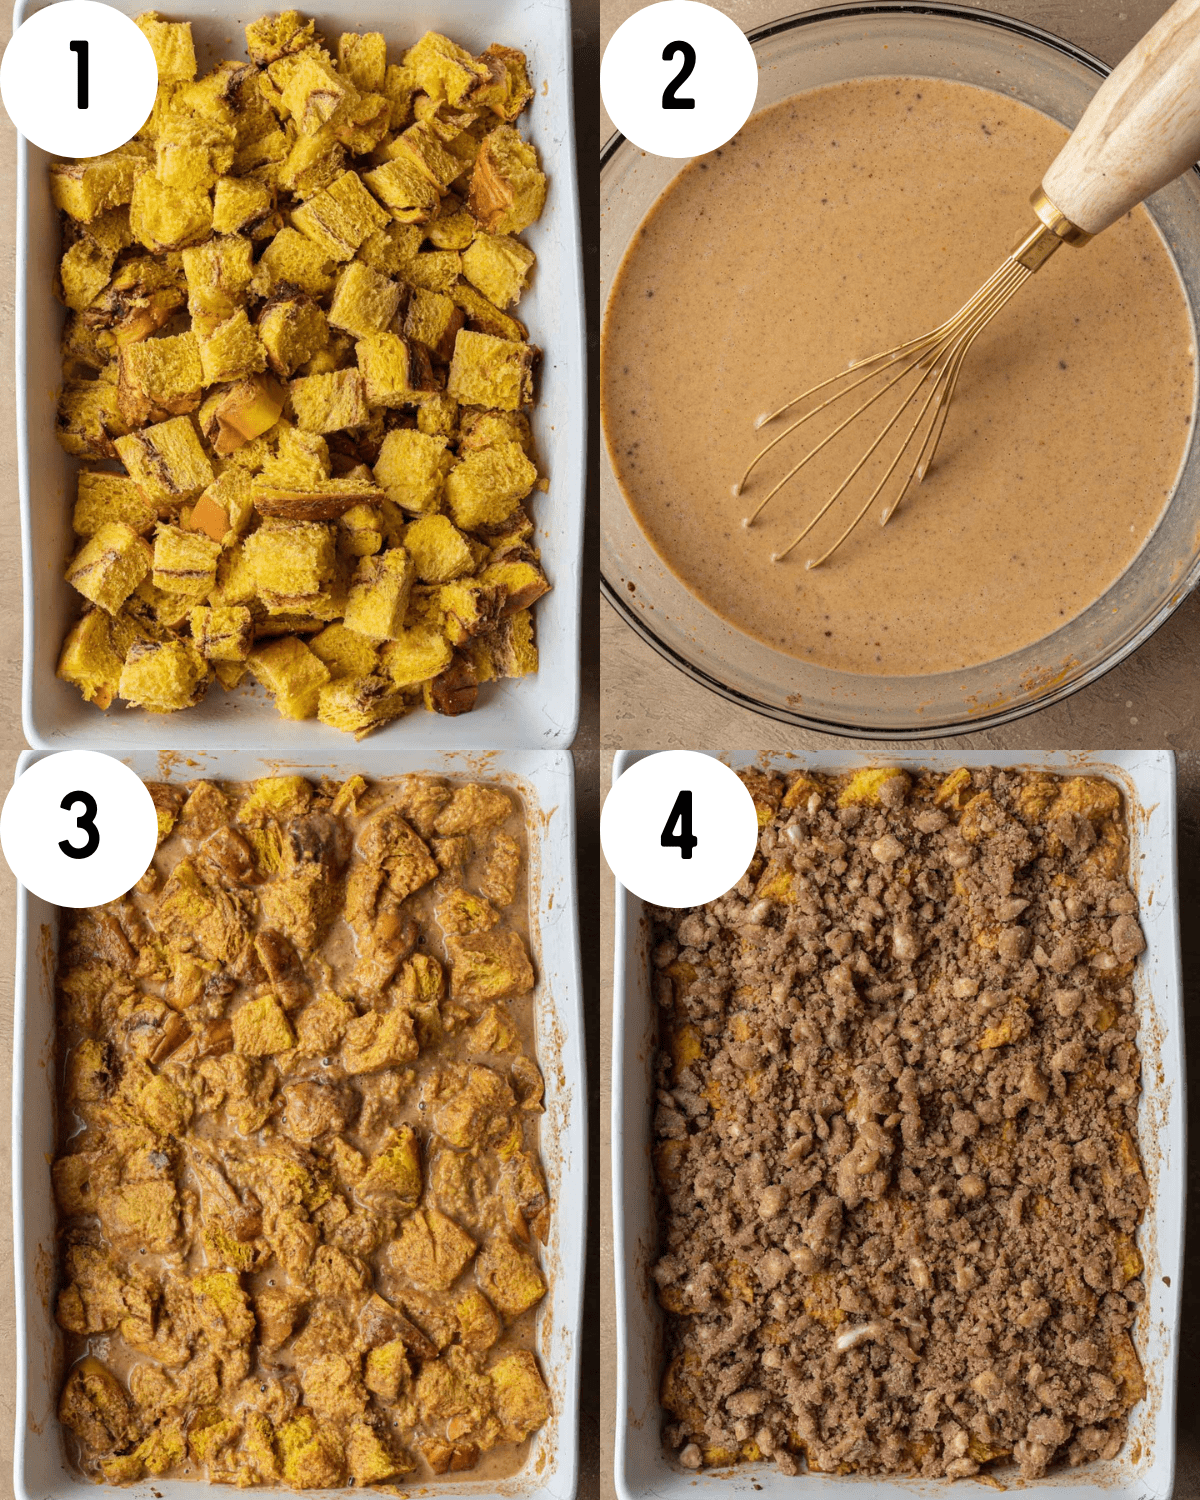 how to make pumpkin french toast casserole. 1. Bread pieces in white casserole dish. 2. Wet ingredients in glass bowl with a whisk. 3. Bread pieces combined with wet ingredients in white casserole dish. 4. Base of pumpkin french toast casserole with cinnamon streusel topping in white casserole dish.